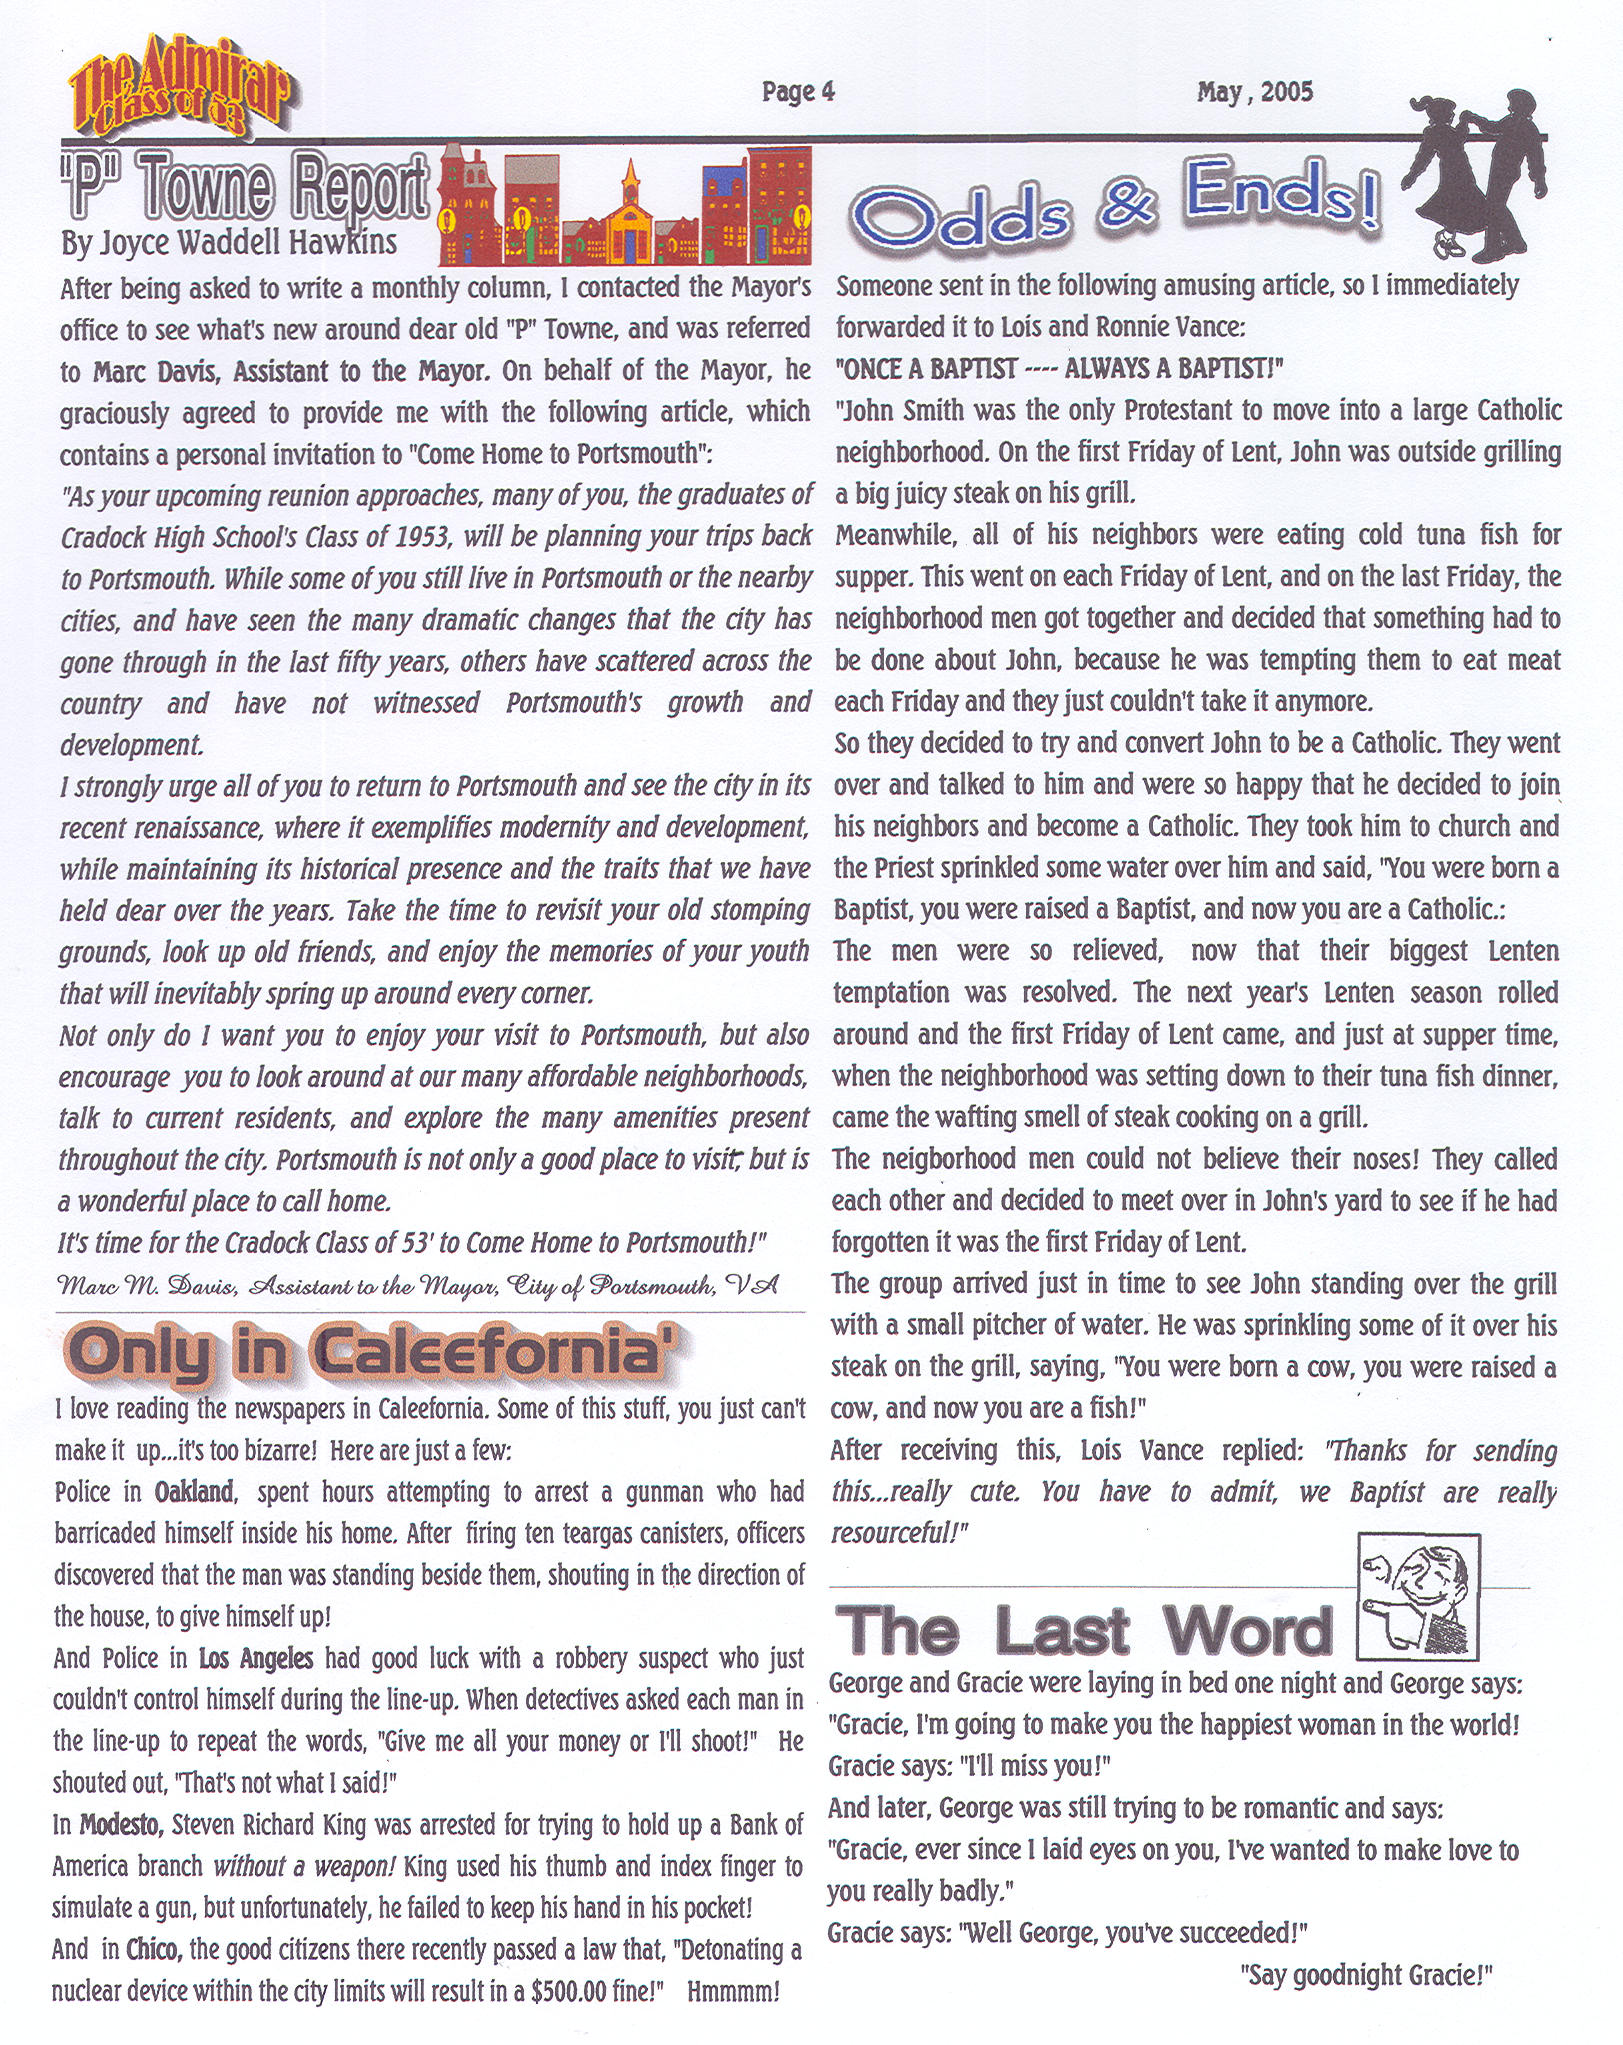 The Admiral - May 2005 - pg. 4